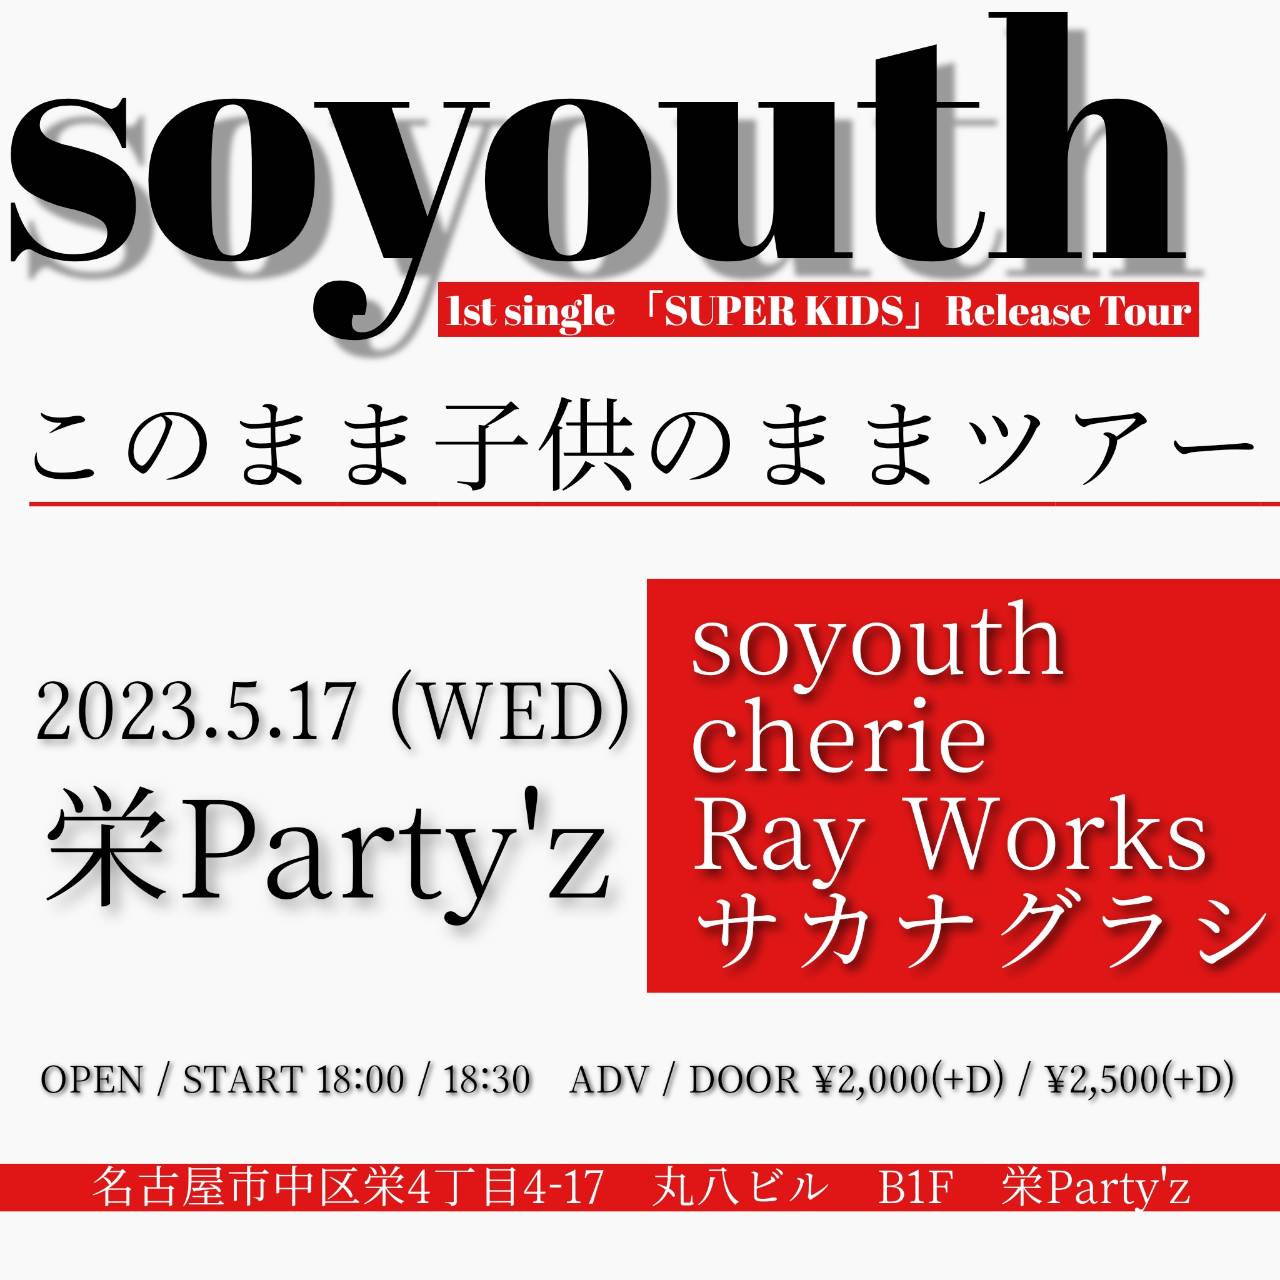 soyouth 1st single 「SUPER KIDS」Release Tour このまま子供のままツアー"